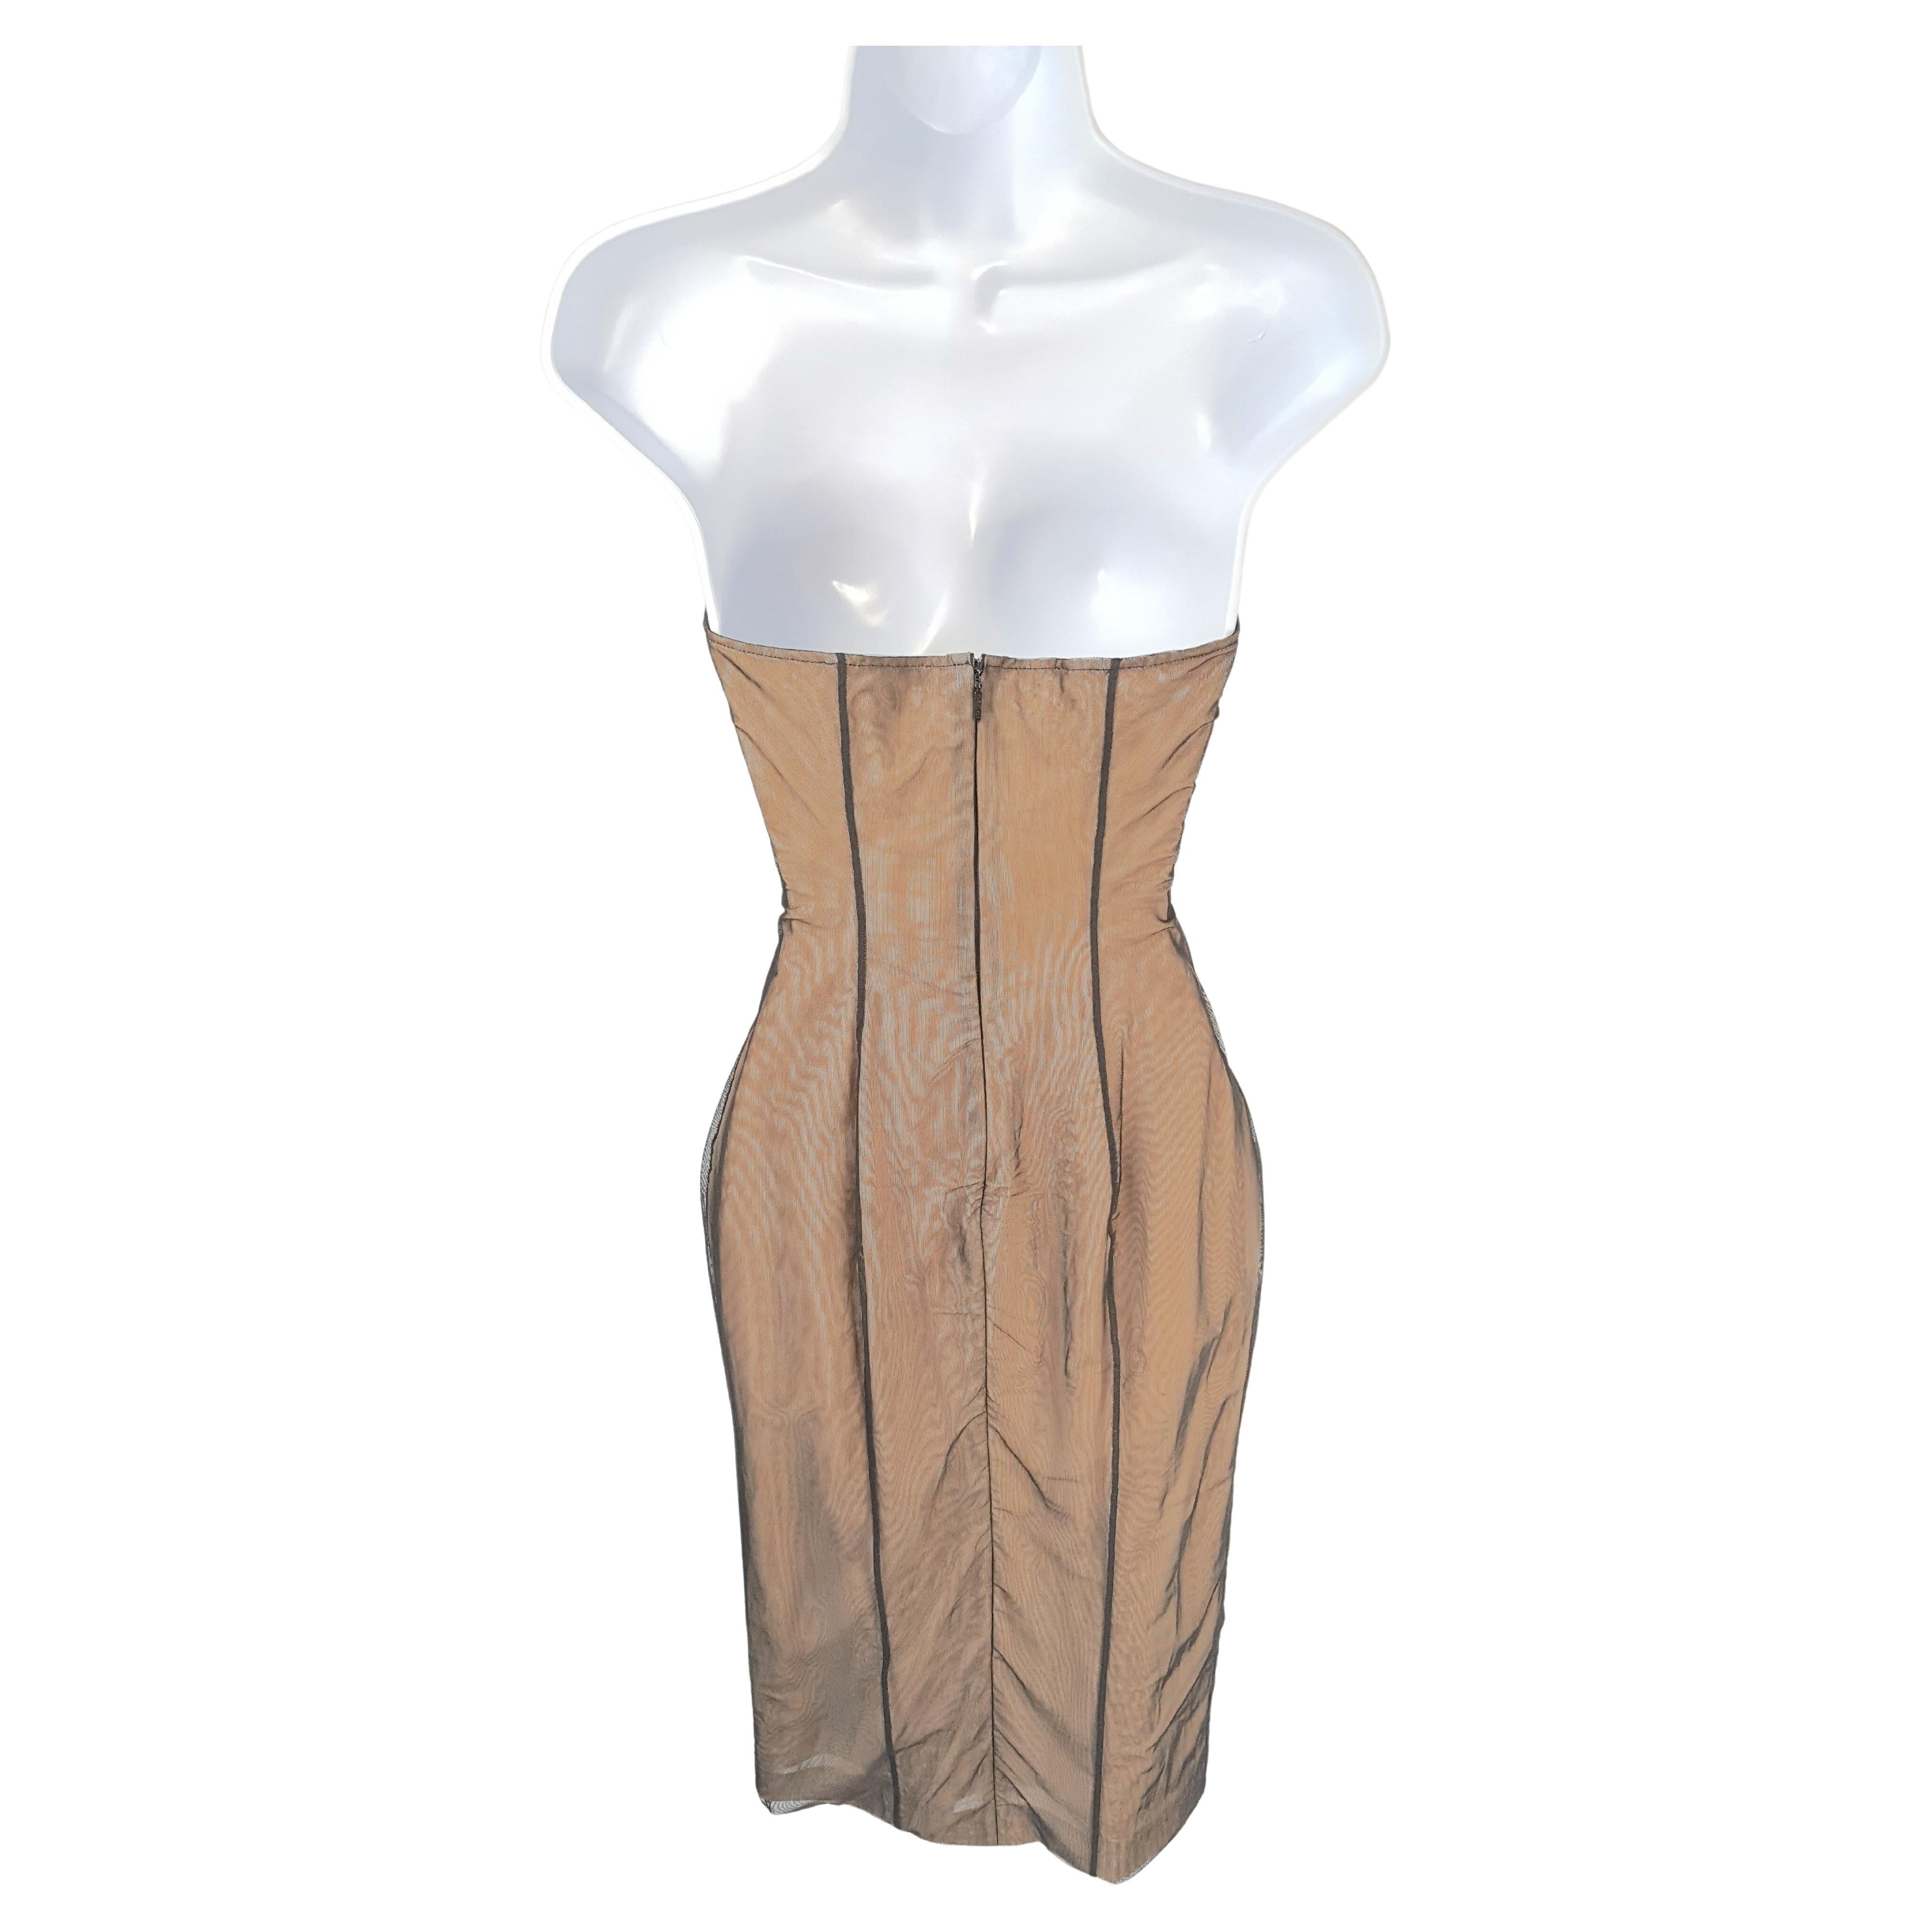 Gucci TomFord 2001 RunwayLook2 Balconette Corset Strapless Tulle AwardYear Dress For Sale 3